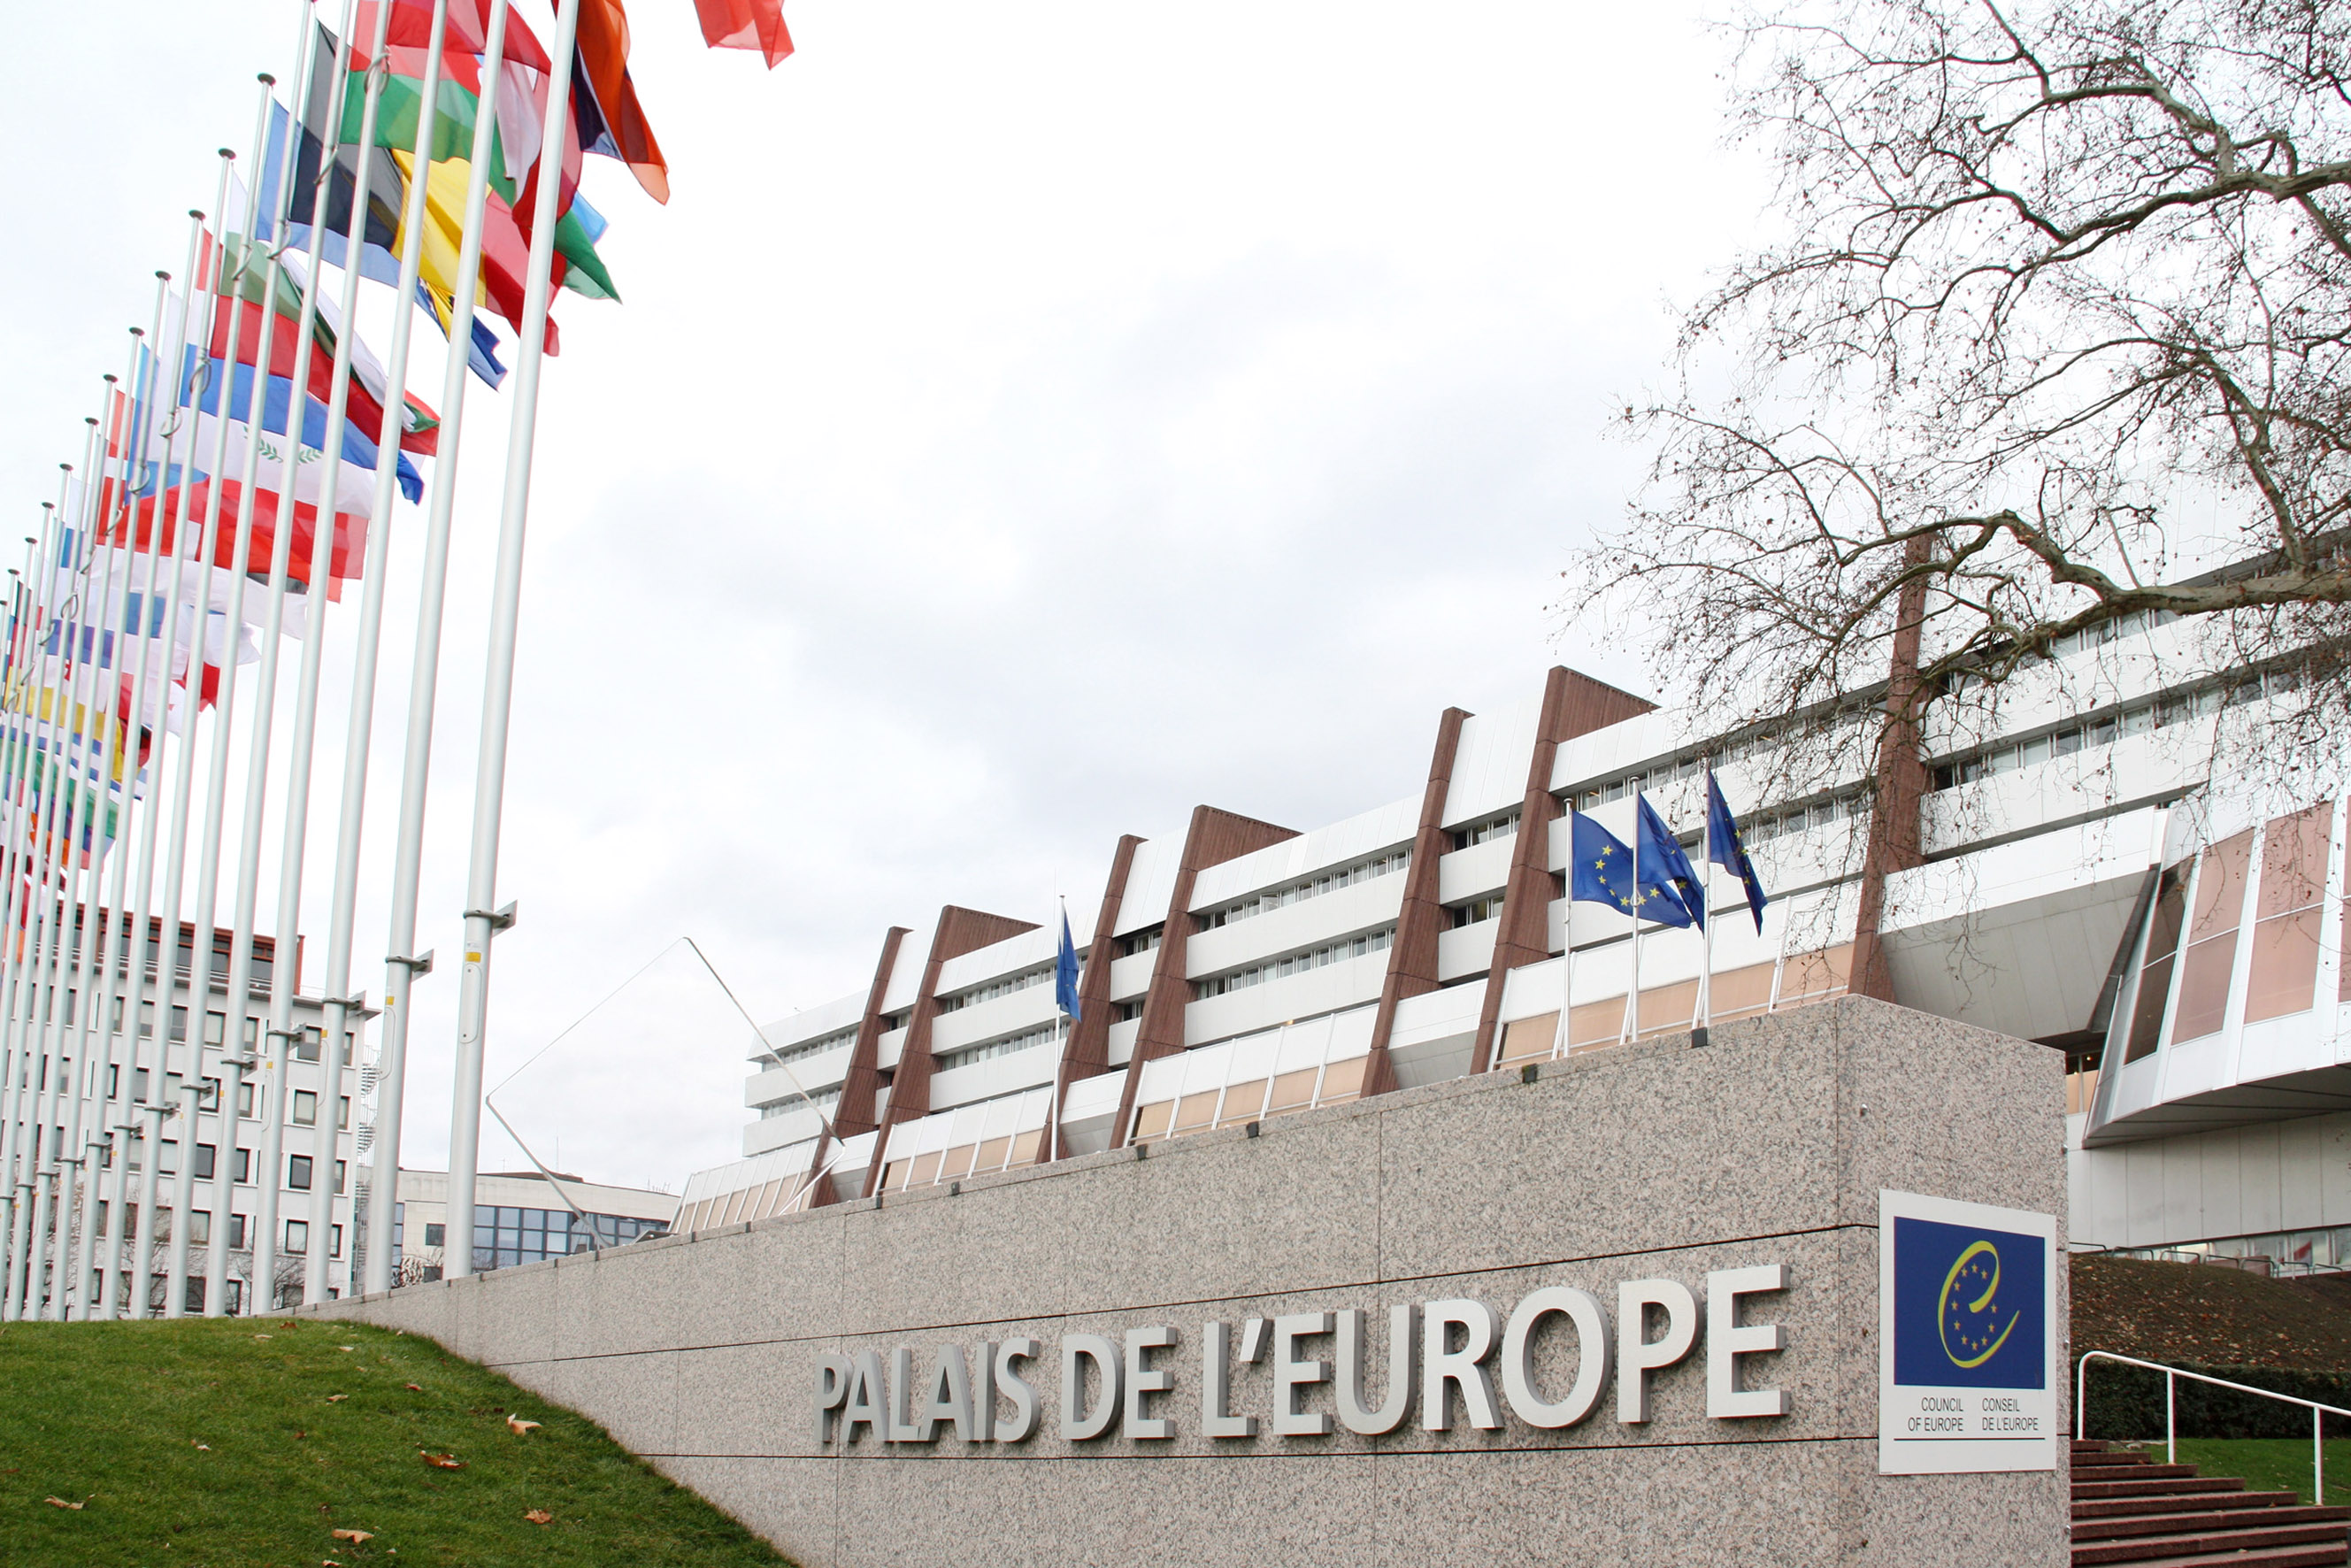 The headquarters for the Council of Europe in Strasbourg on February 4 2011 (by Jordi Font)